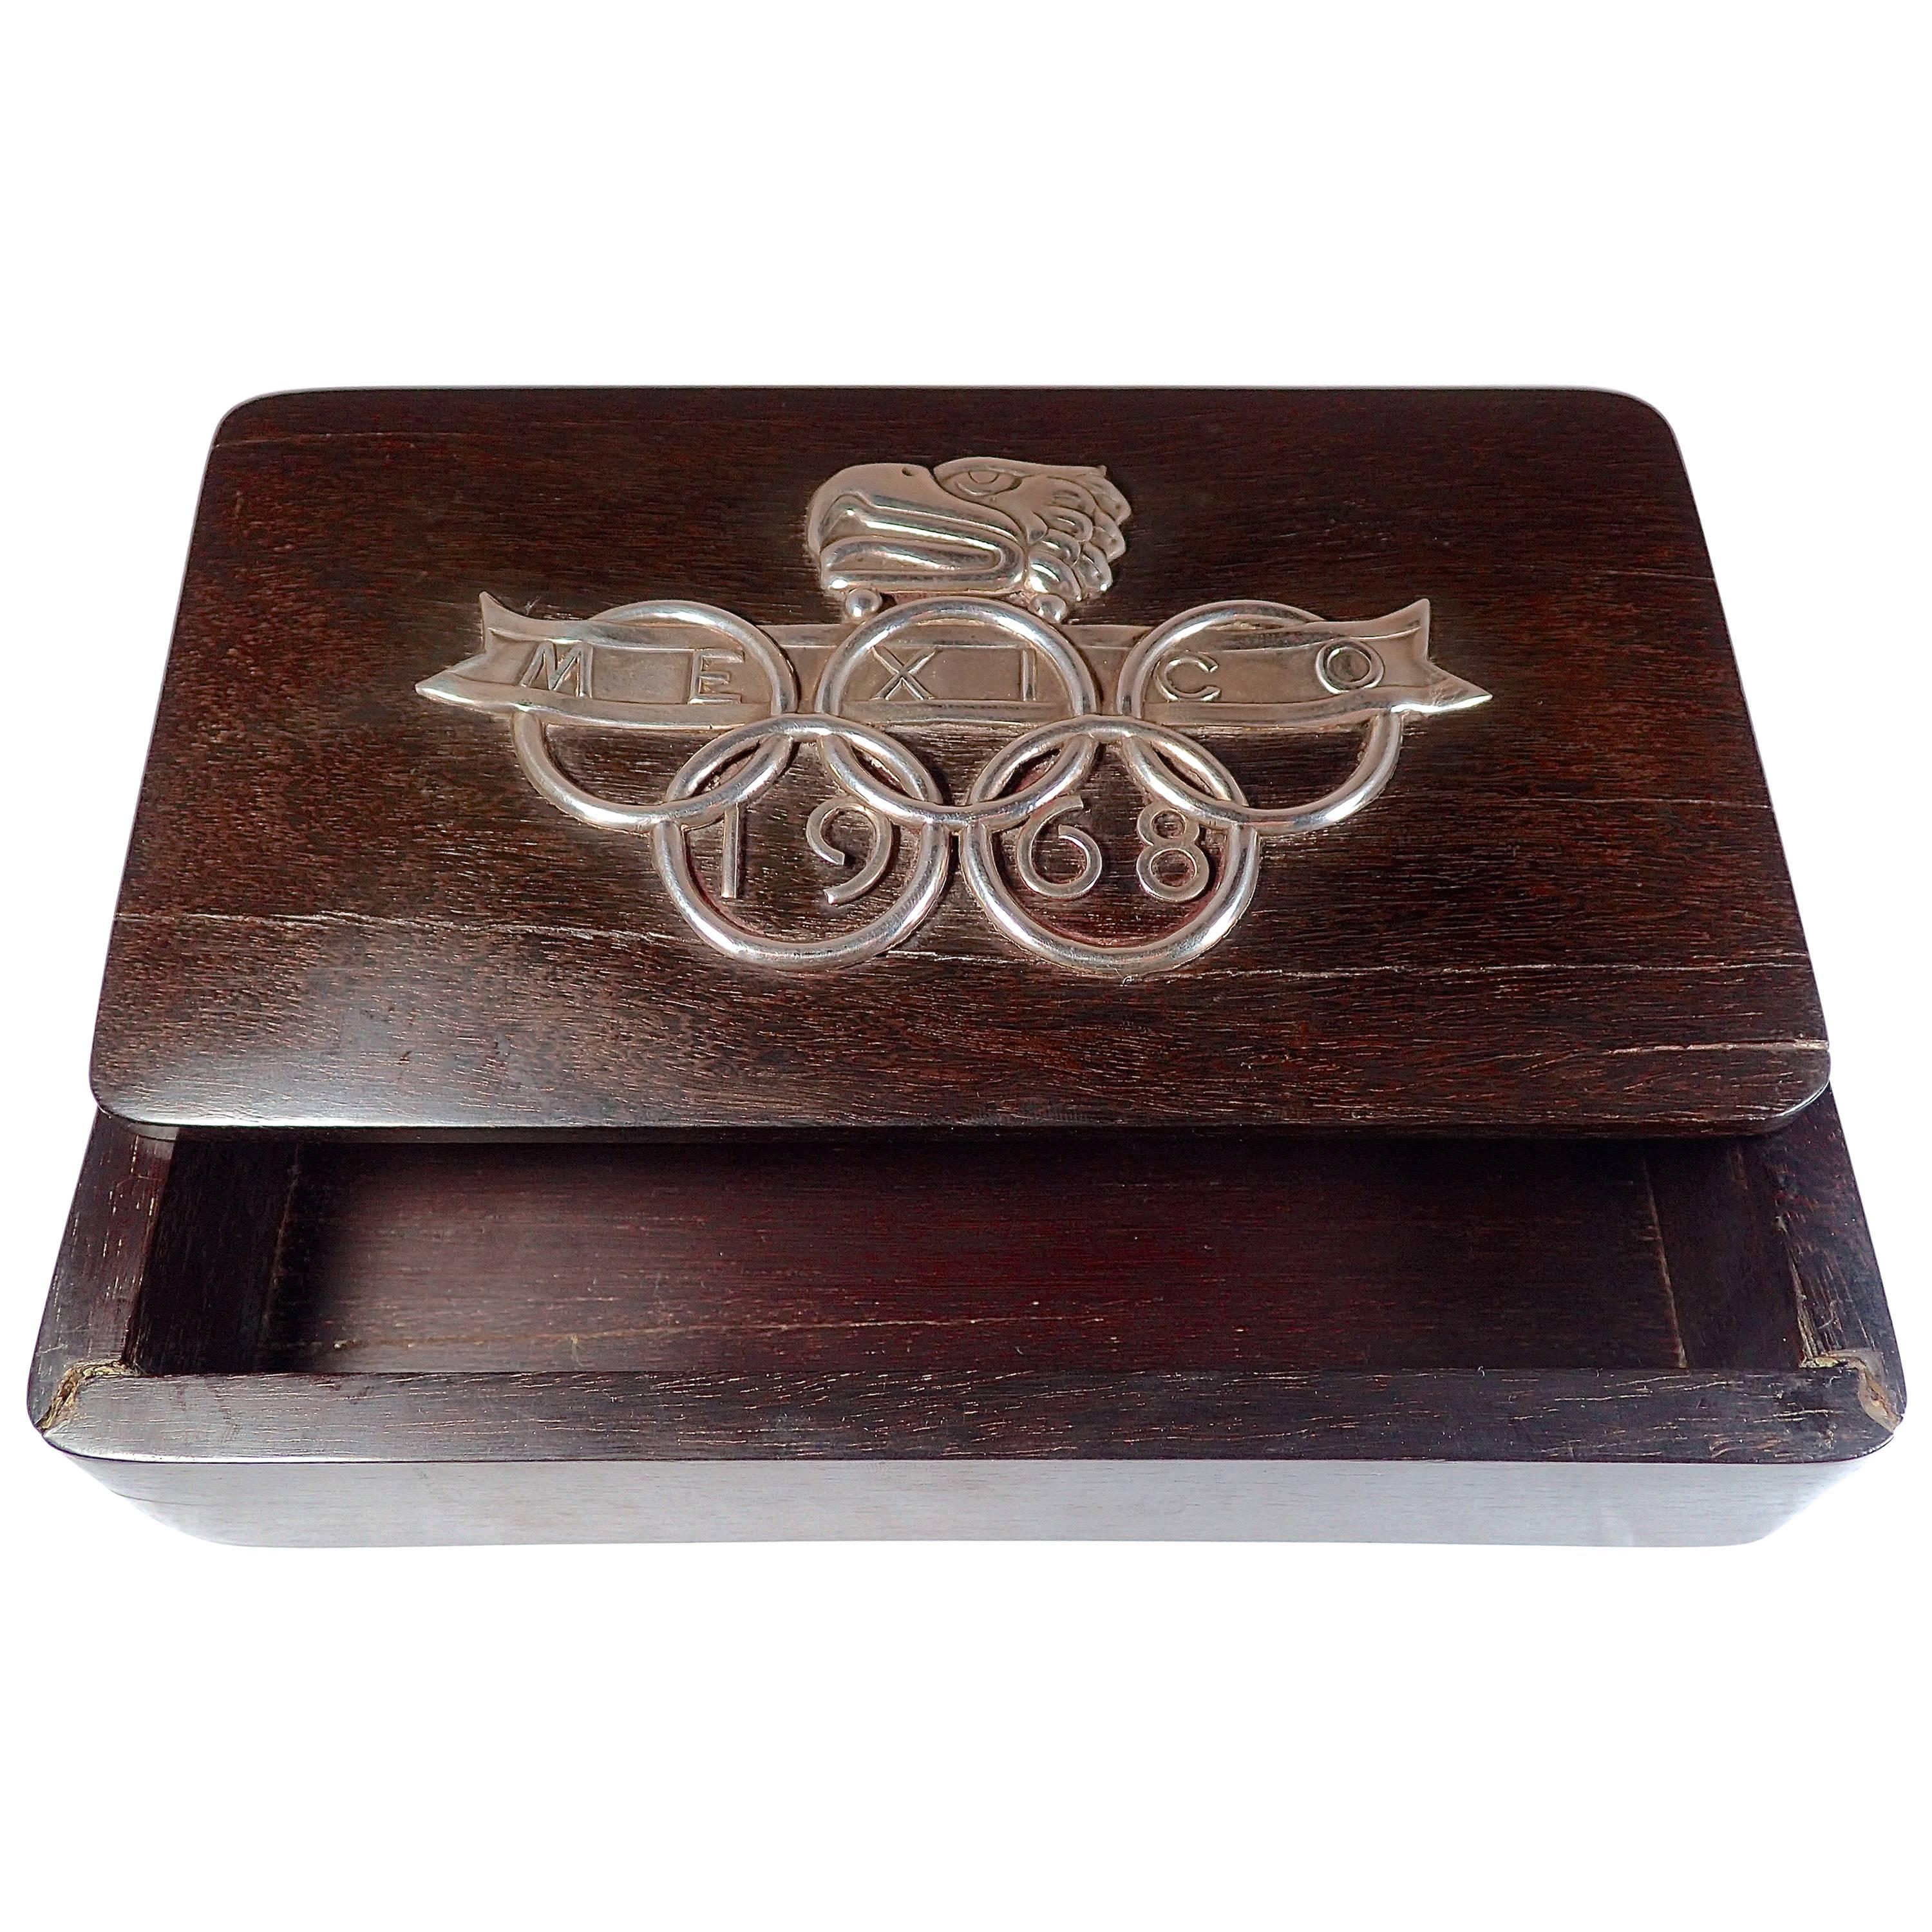 1968 Mexican Olympics Commemorative Box For Sale